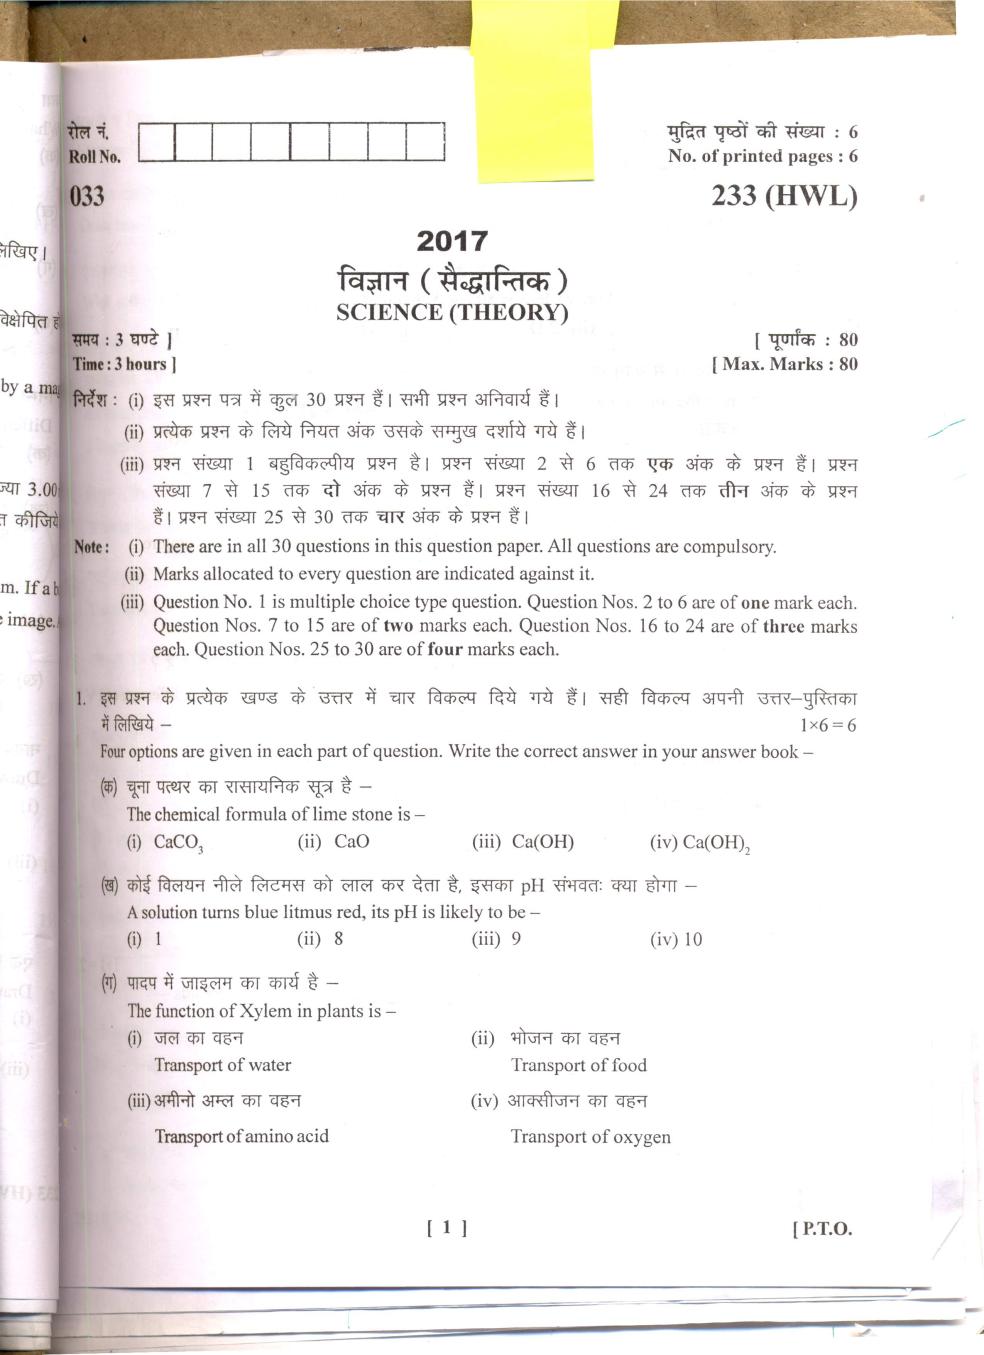 Uttarakhand Board Class 10 Question Paper 2017 for Science - Page 1